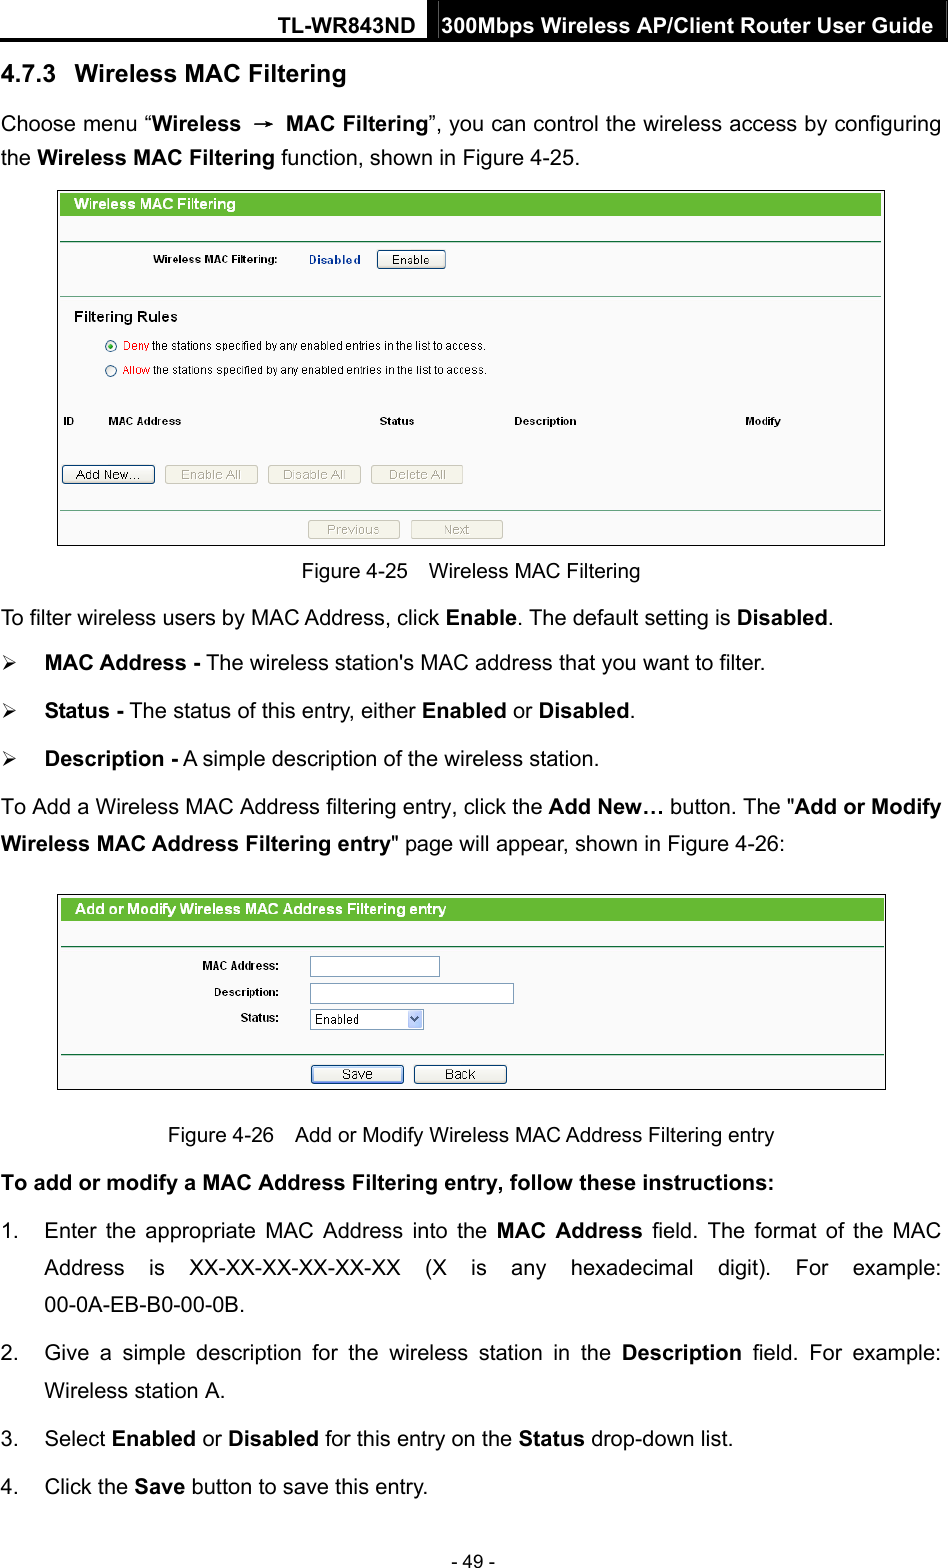 TL-WR843ND 300Mbps Wireless AP/Client Router User Guide - 49 - 4.7.3  Wireless MAC Filtering  Choose menu “Wireless  → MAC Filtering”, you can control the wireless access by configuring the Wireless MAC Filtering function, shown in Figure 4-25.  Figure 4-25    Wireless MAC Filtering To filter wireless users by MAC Address, click Enable. The default setting is Disabled.  MAC Address - The wireless station&apos;s MAC address that you want to filter.    Status - The status of this entry, either Enabled or Disabled.  Description - A simple description of the wireless station.   To Add a Wireless MAC Address filtering entry, click the Add New… button. The &quot;Add or Modify Wireless MAC Address Filtering entry&quot; page will appear, shown in Figure 4-26:  Figure 4-26    Add or Modify Wireless MAC Address Filtering entry To add or modify a MAC Address Filtering entry, follow these instructions: 1.  Enter the appropriate MAC Address into the MAC Address field. The format of the MAC Address is XX-XX-XX-XX-XX-XX (X is any hexadecimal digit). For example: 00-0A-EB-B0-00-0B.  2.  Give a simple description for the wireless station in the Description field. For example: Wireless station A. 3. Select Enabled or Disabled for this entry on the Status drop-down list. 4. Click the Save button to save this entry. 